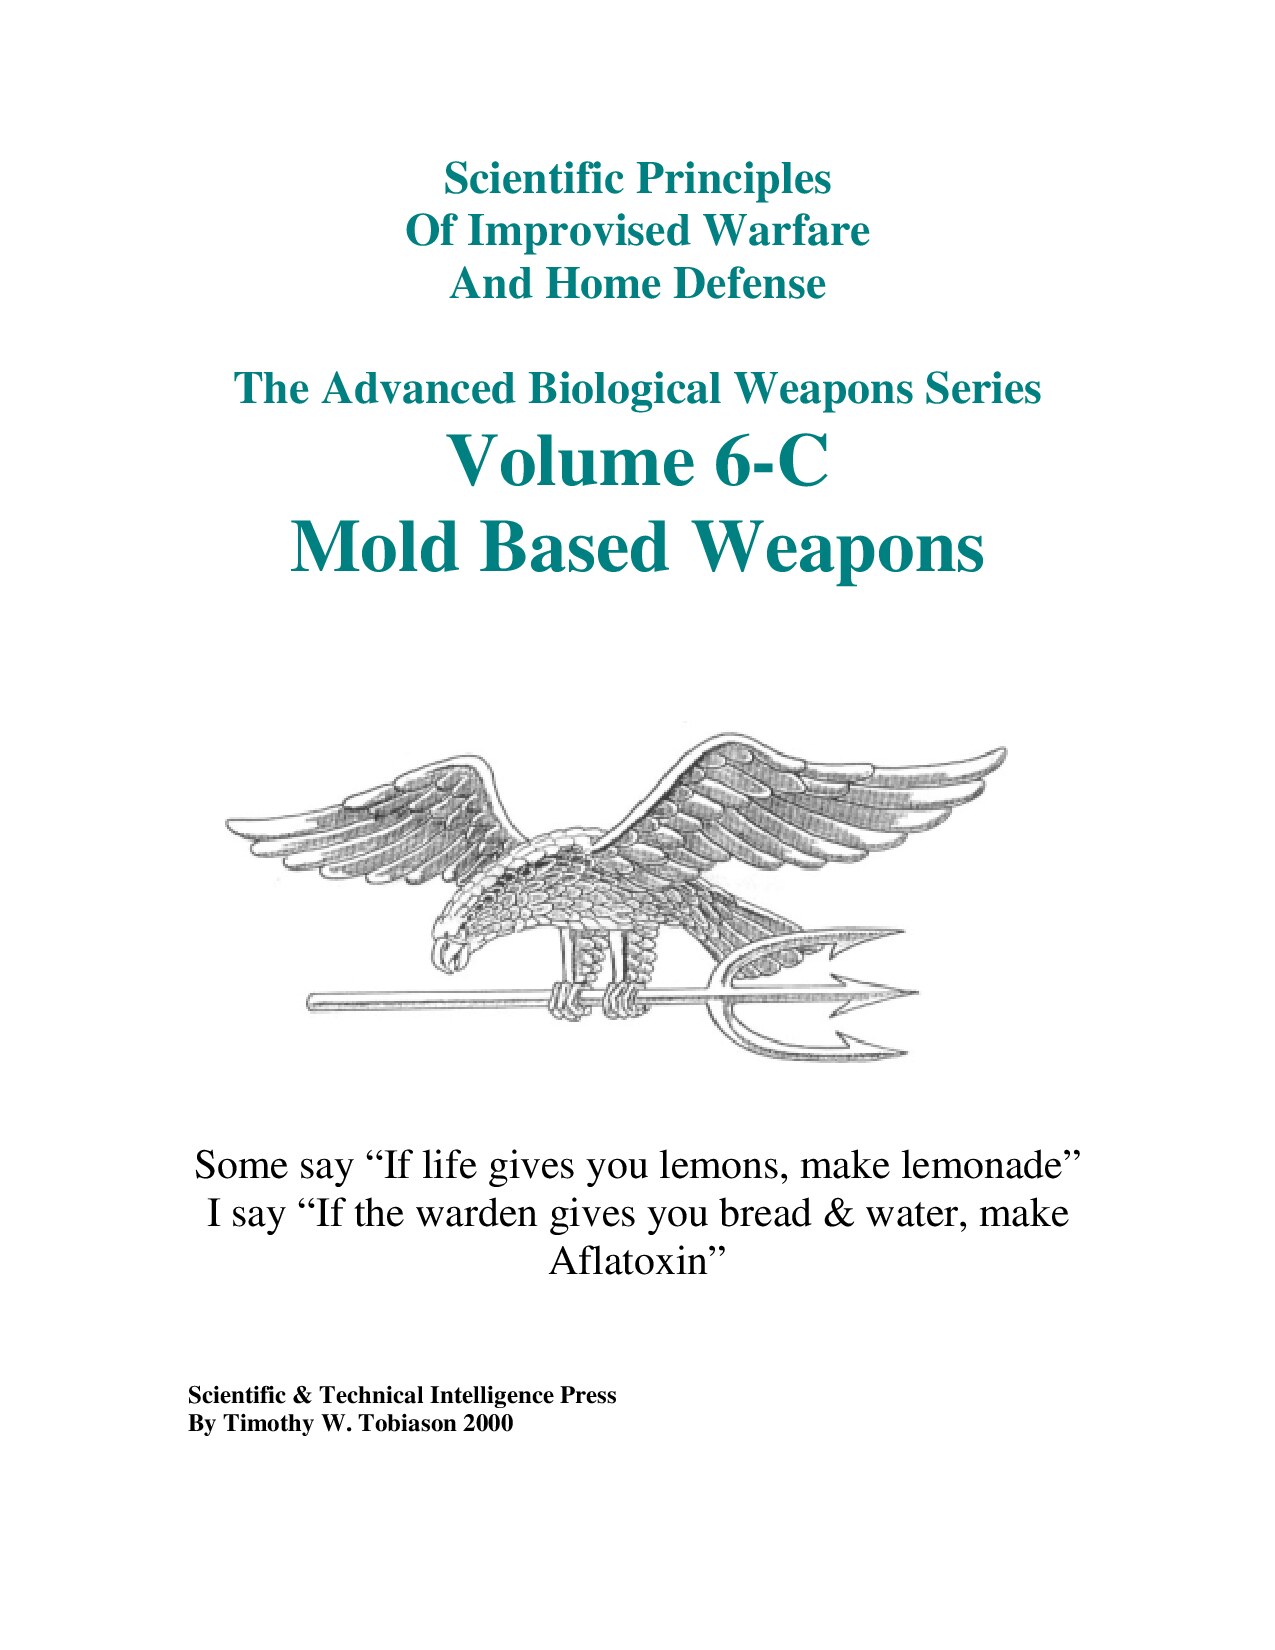 Scientific Principles of Improvised Weapons and Home Defense - Volume 6-C: Mold Based Weapons